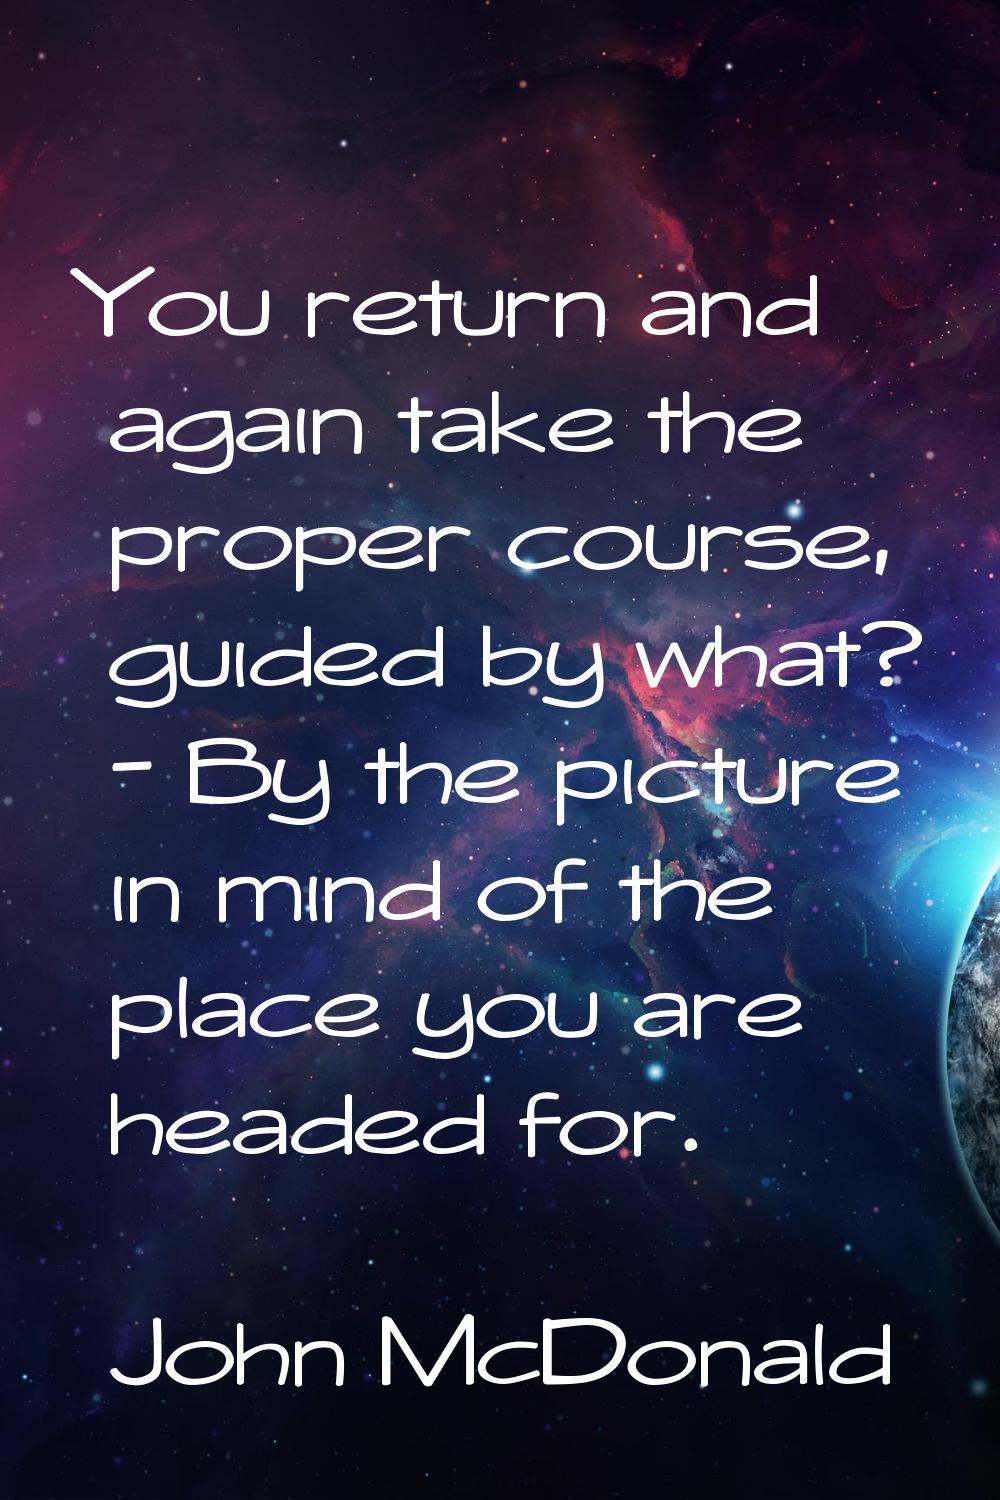 You return and again take the proper course, guided by what? - By the picture in mind of the place 